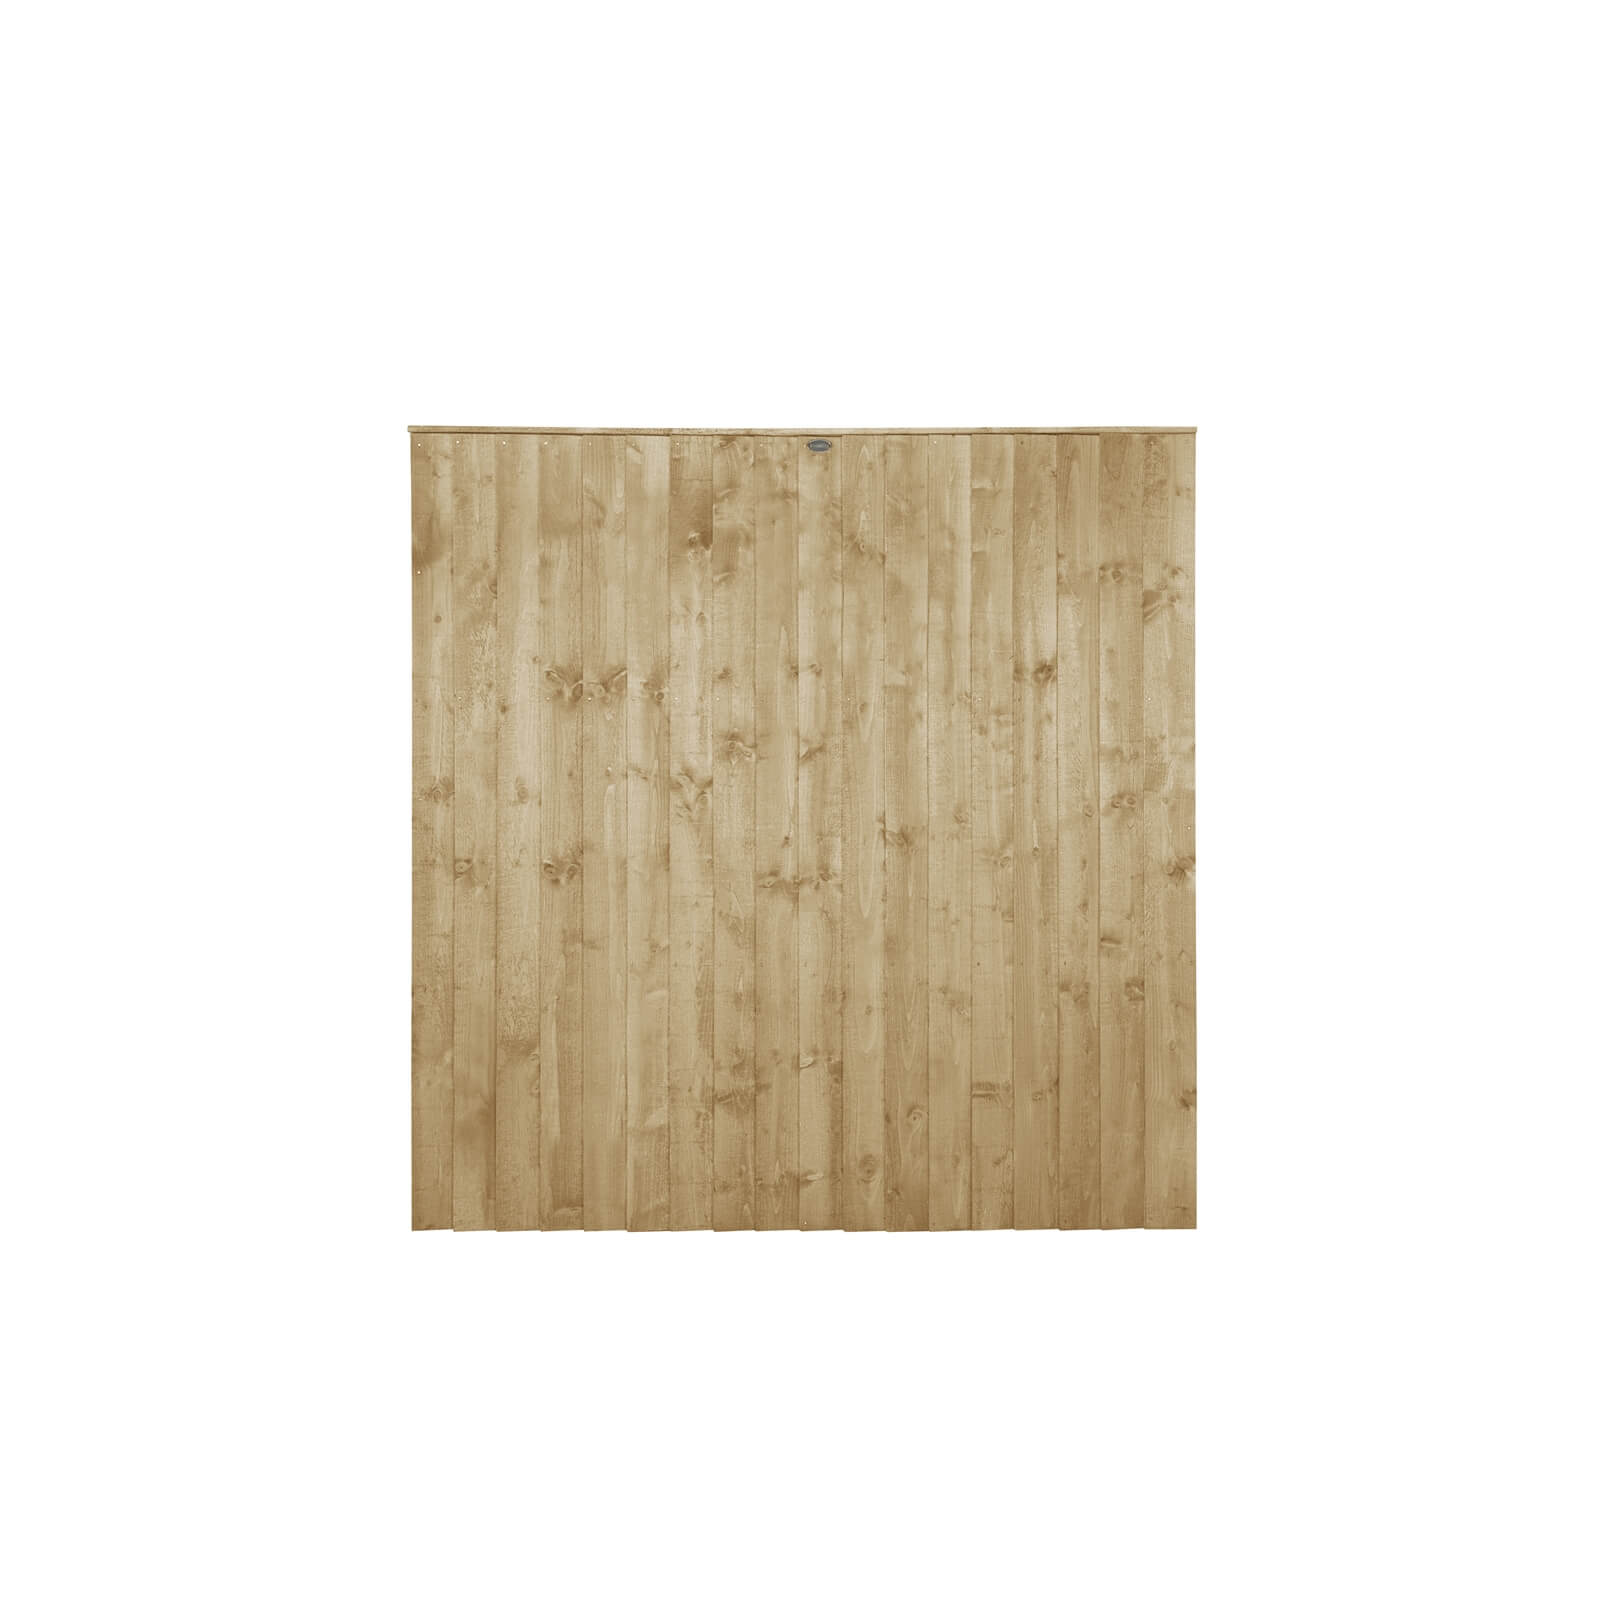 6ft x 6ft (1.83m x 1.85m) Pressure Treated Featheredge Fence Panel - Pack of 20